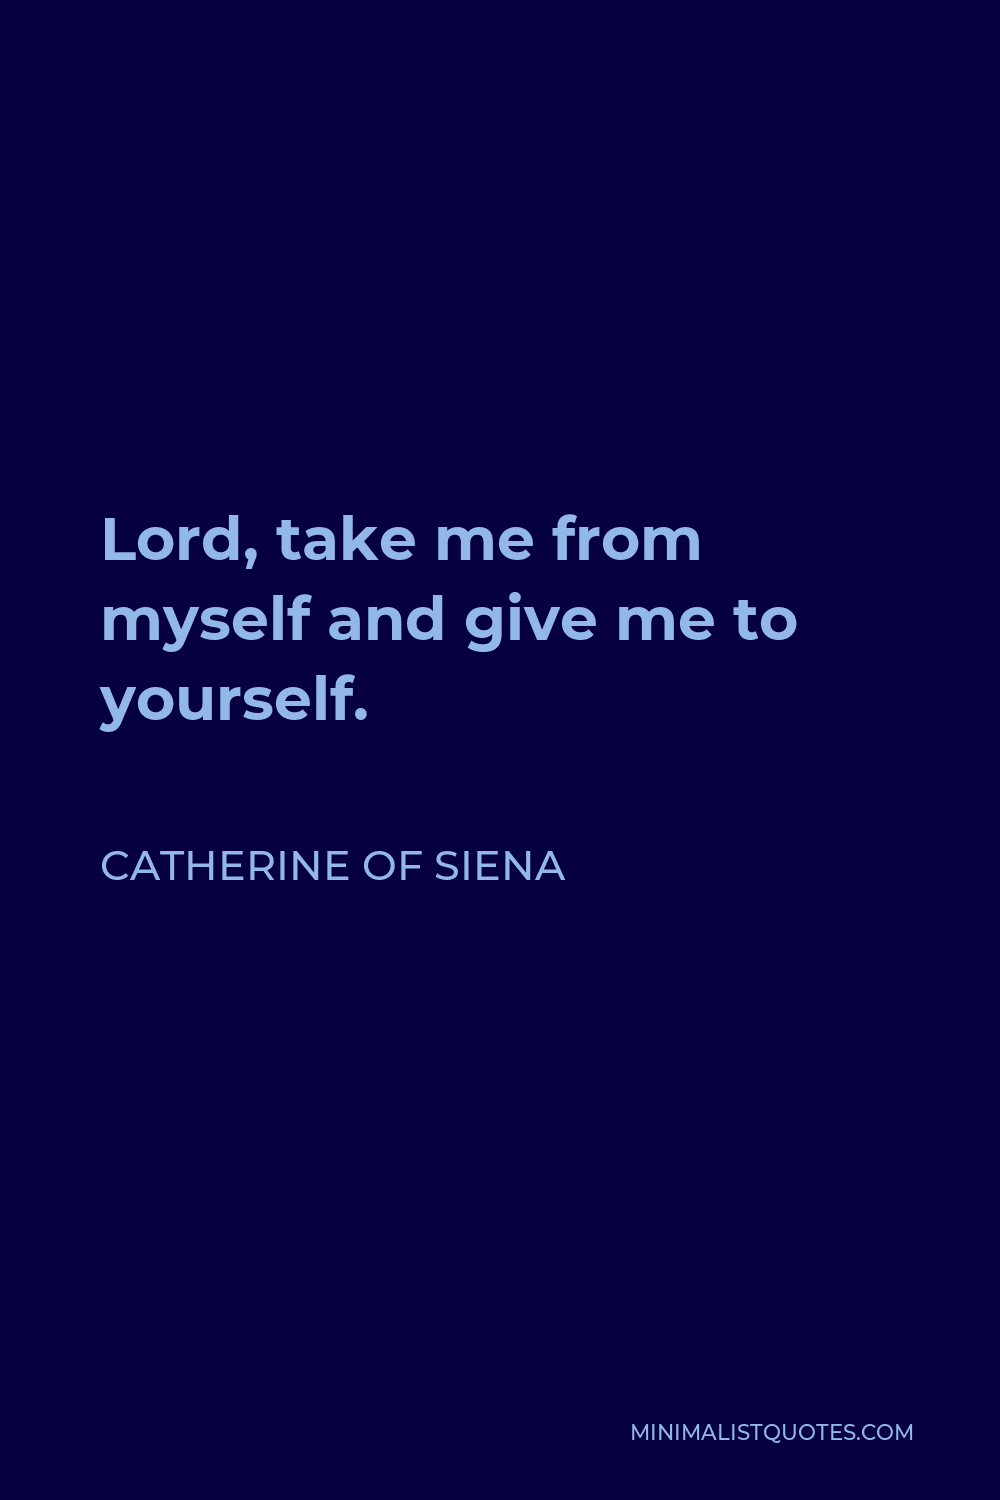 Catherine of Siena Quote - Lord, take me from myself and give me to yourself.